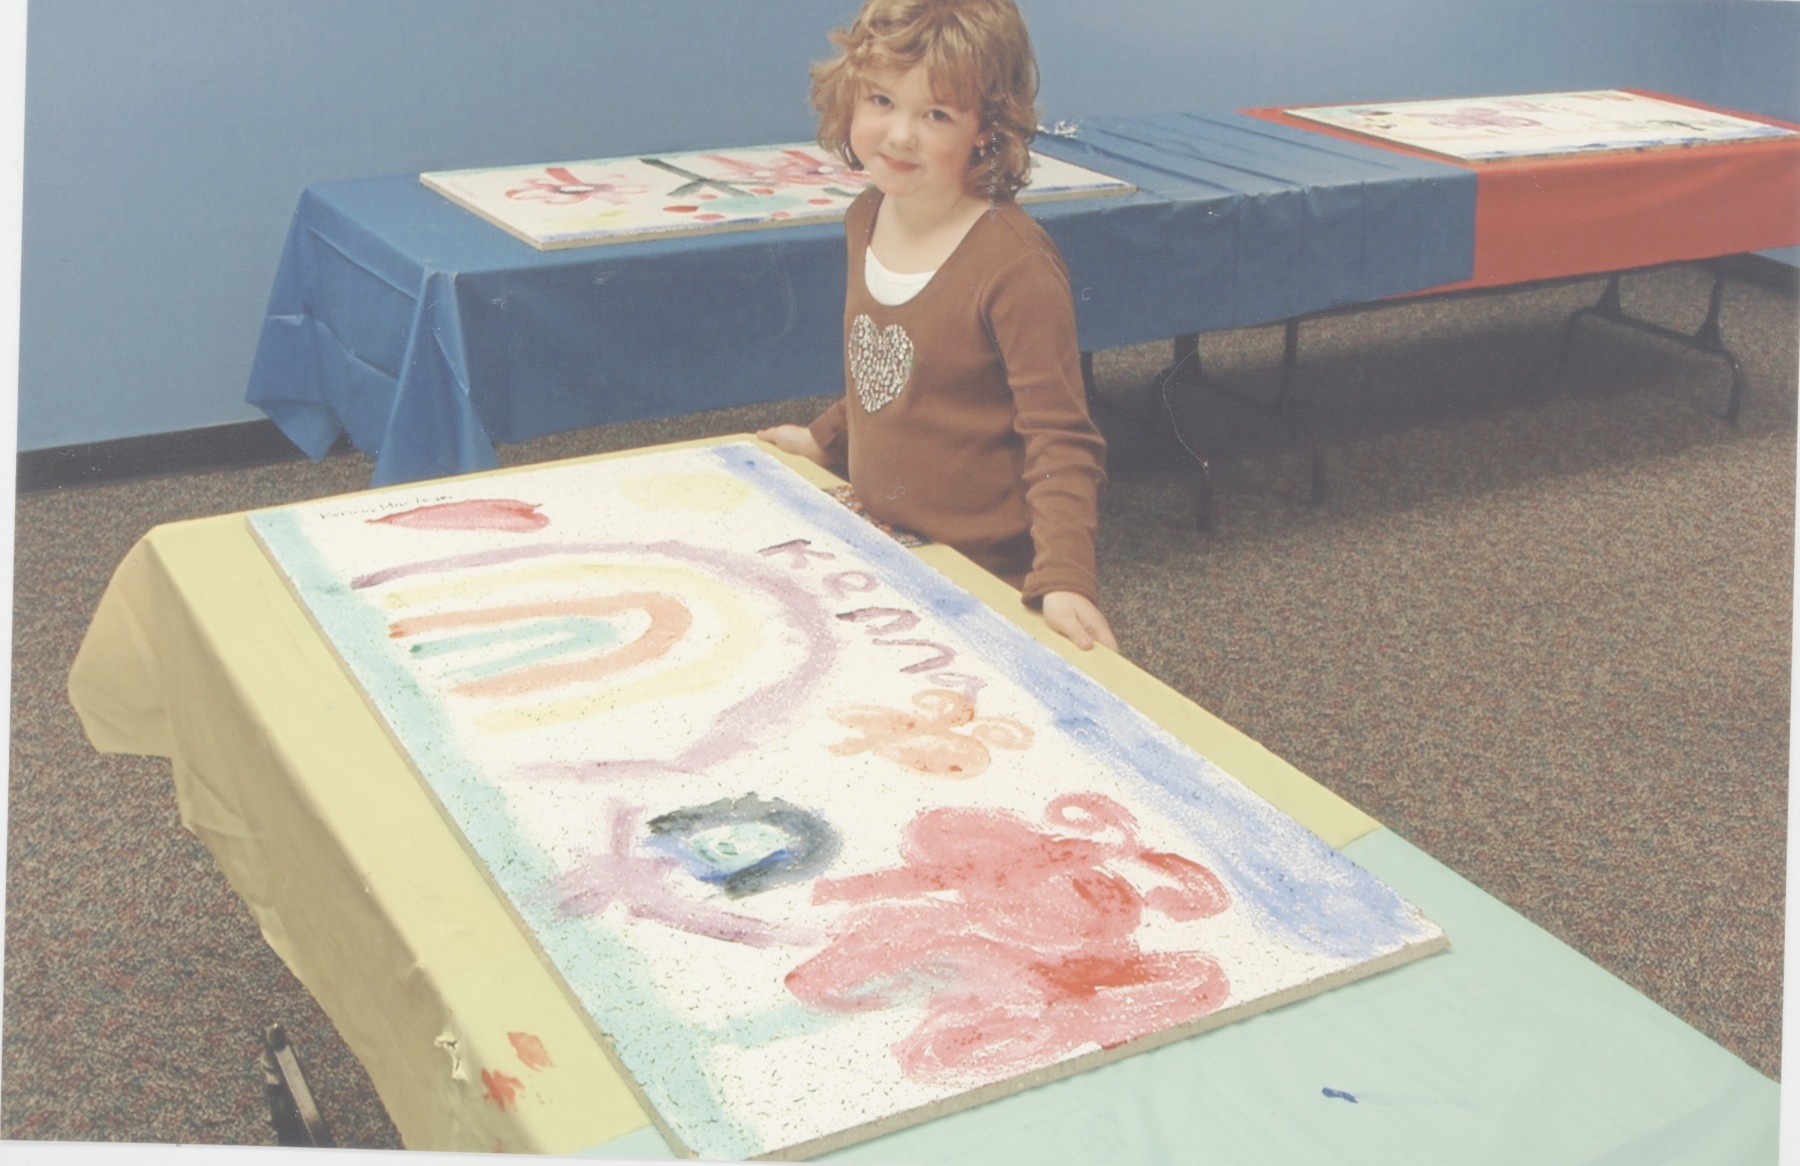 Eight years ago, Kenna MacLean was one of nearly 100 children who painted a ceiling tile, which are spread throughout the library’s lower level.